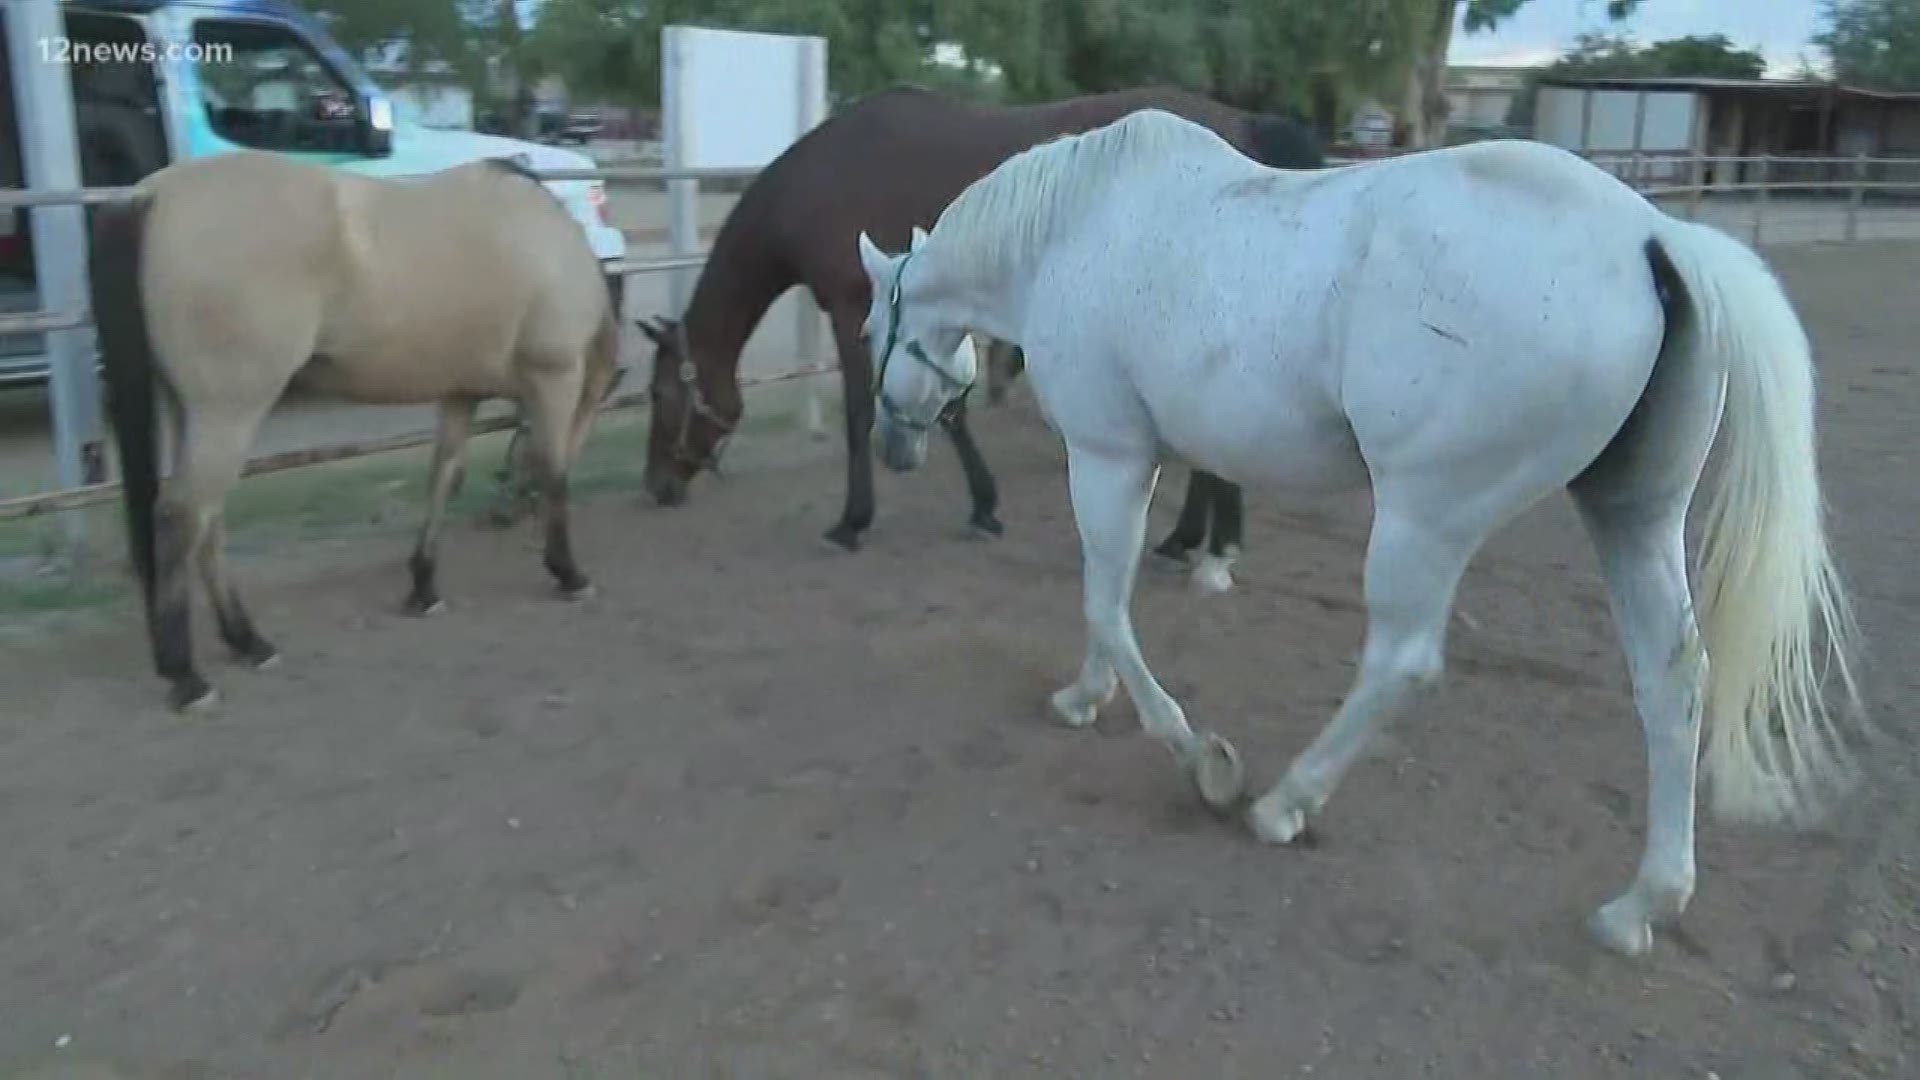 A Valley horse sanctuary, Hunkapi Farms in Scottsdale, is looking for a little help. Due to a lack of funding the farm has had to suspend a program that helps first responders suffering from PTSD and addiction. With your help, the program can be brought back.